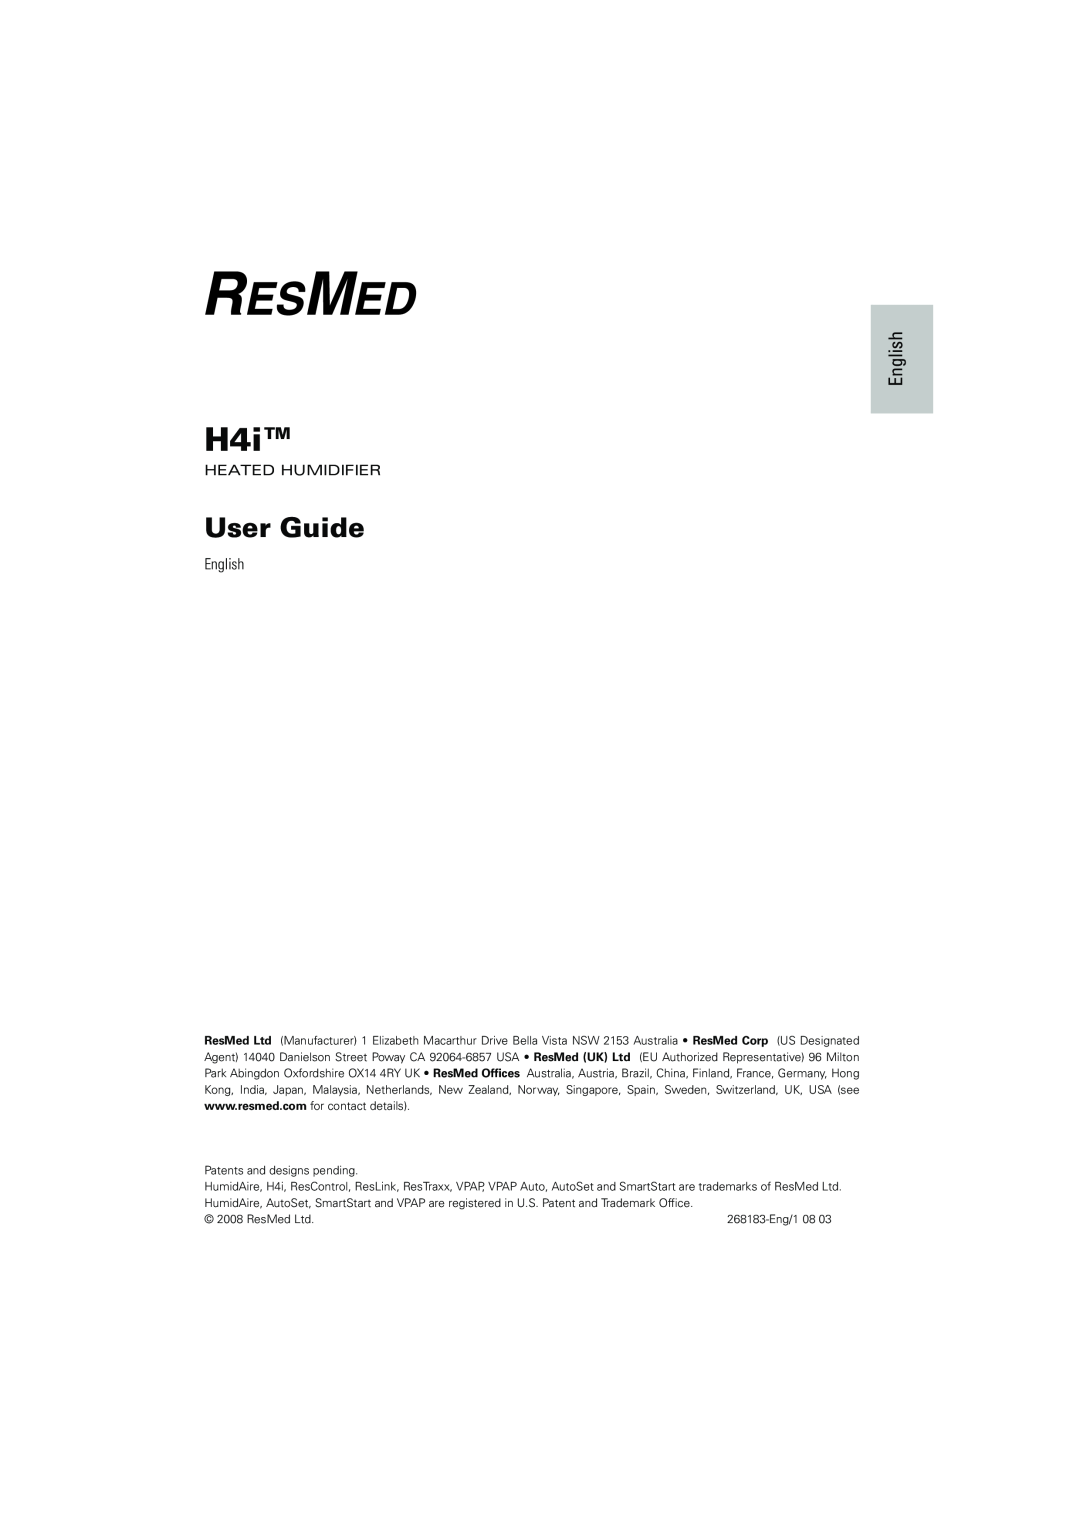 ResMed H4i manual English, User Guide 